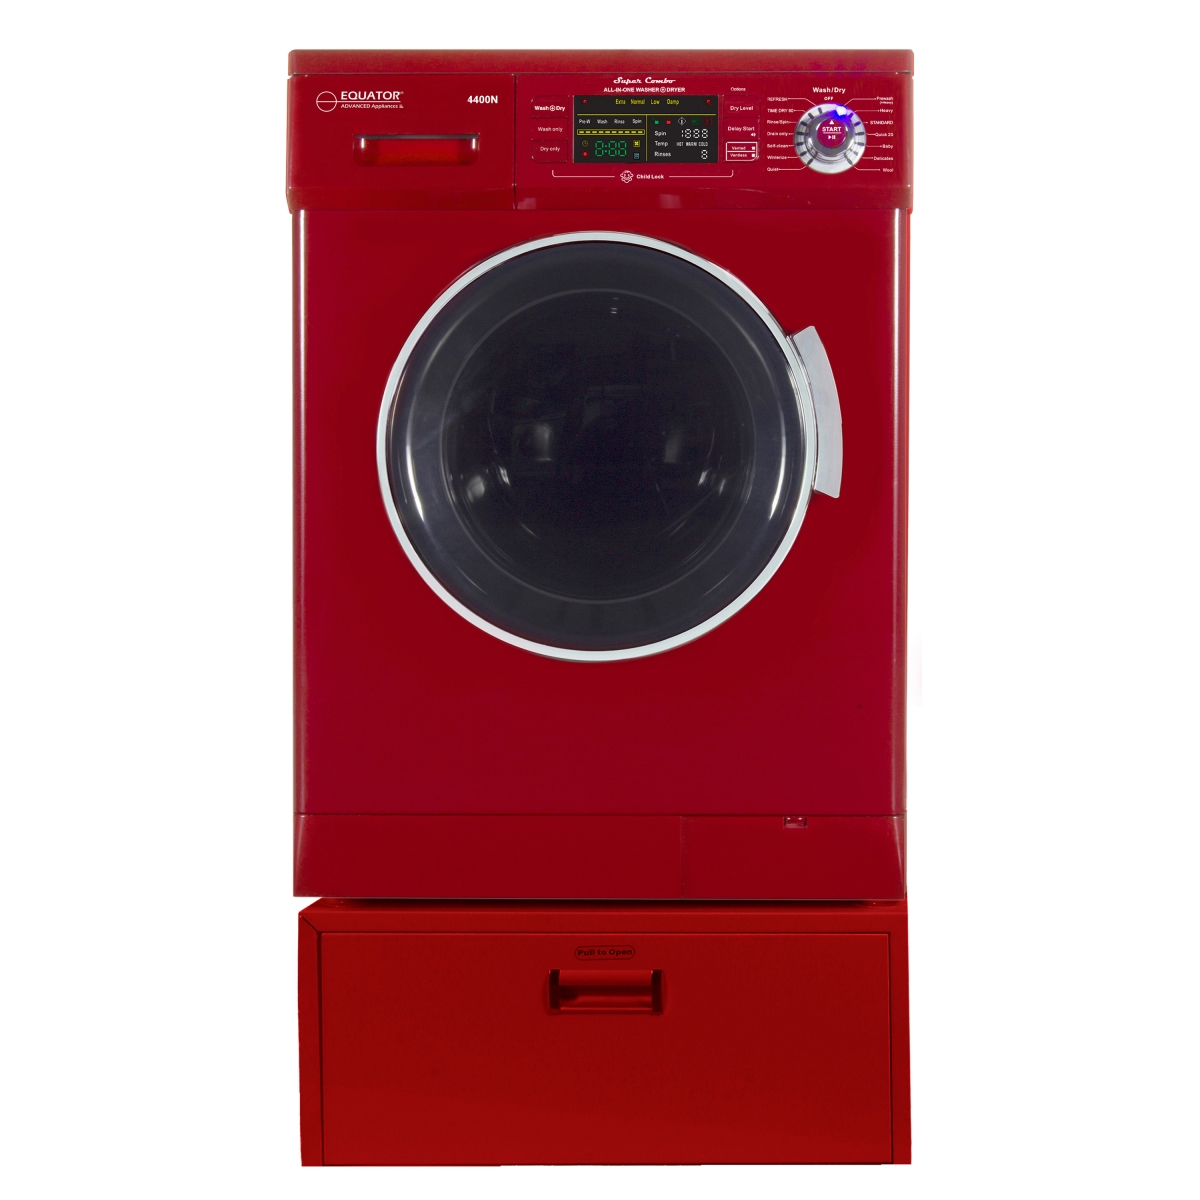 Ez4400n-pdl2833m Compact 13 Lbs Combination Washer Dryer With Pedestal, Merlot - 2019 Model